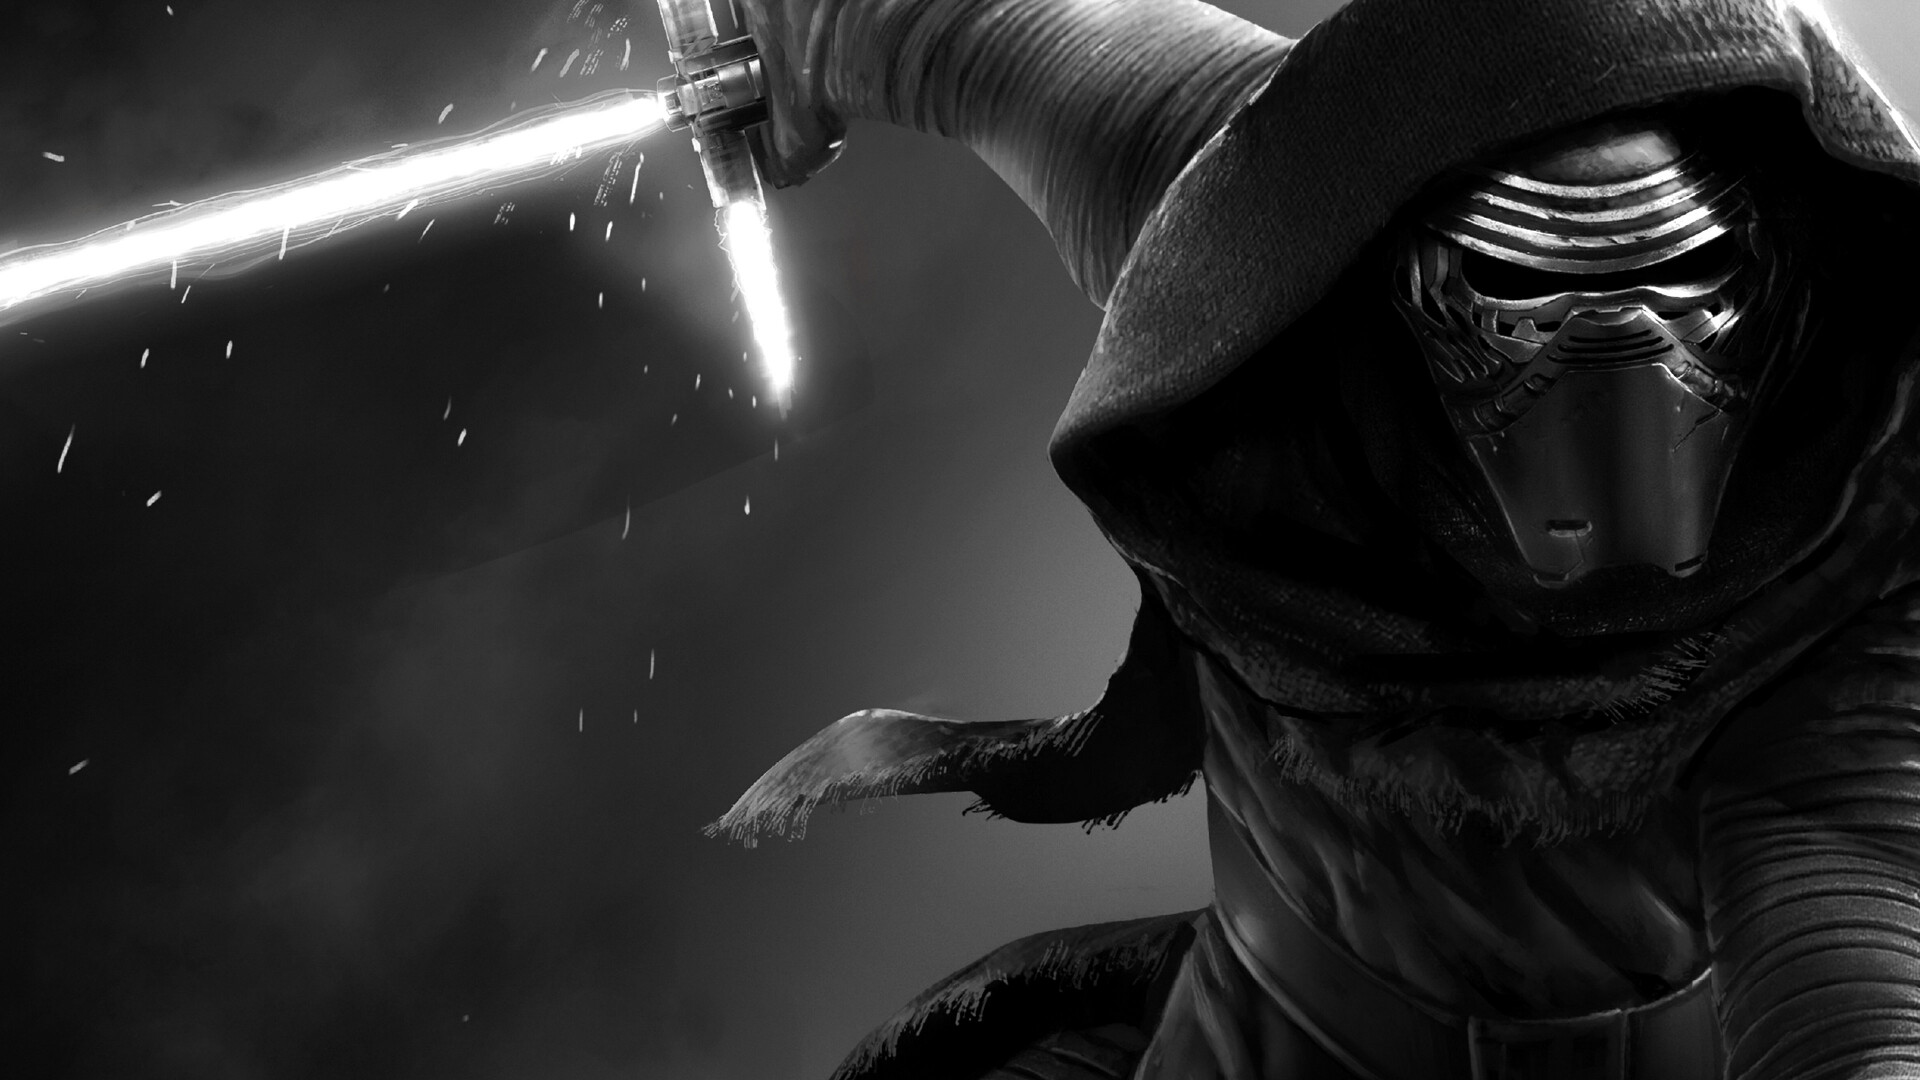 Star Wars: Kylo Ren, The child of characters Han Solo and Princess Leia Organa Skywalker, Monochrome. 1920x1080 Full HD Wallpaper.